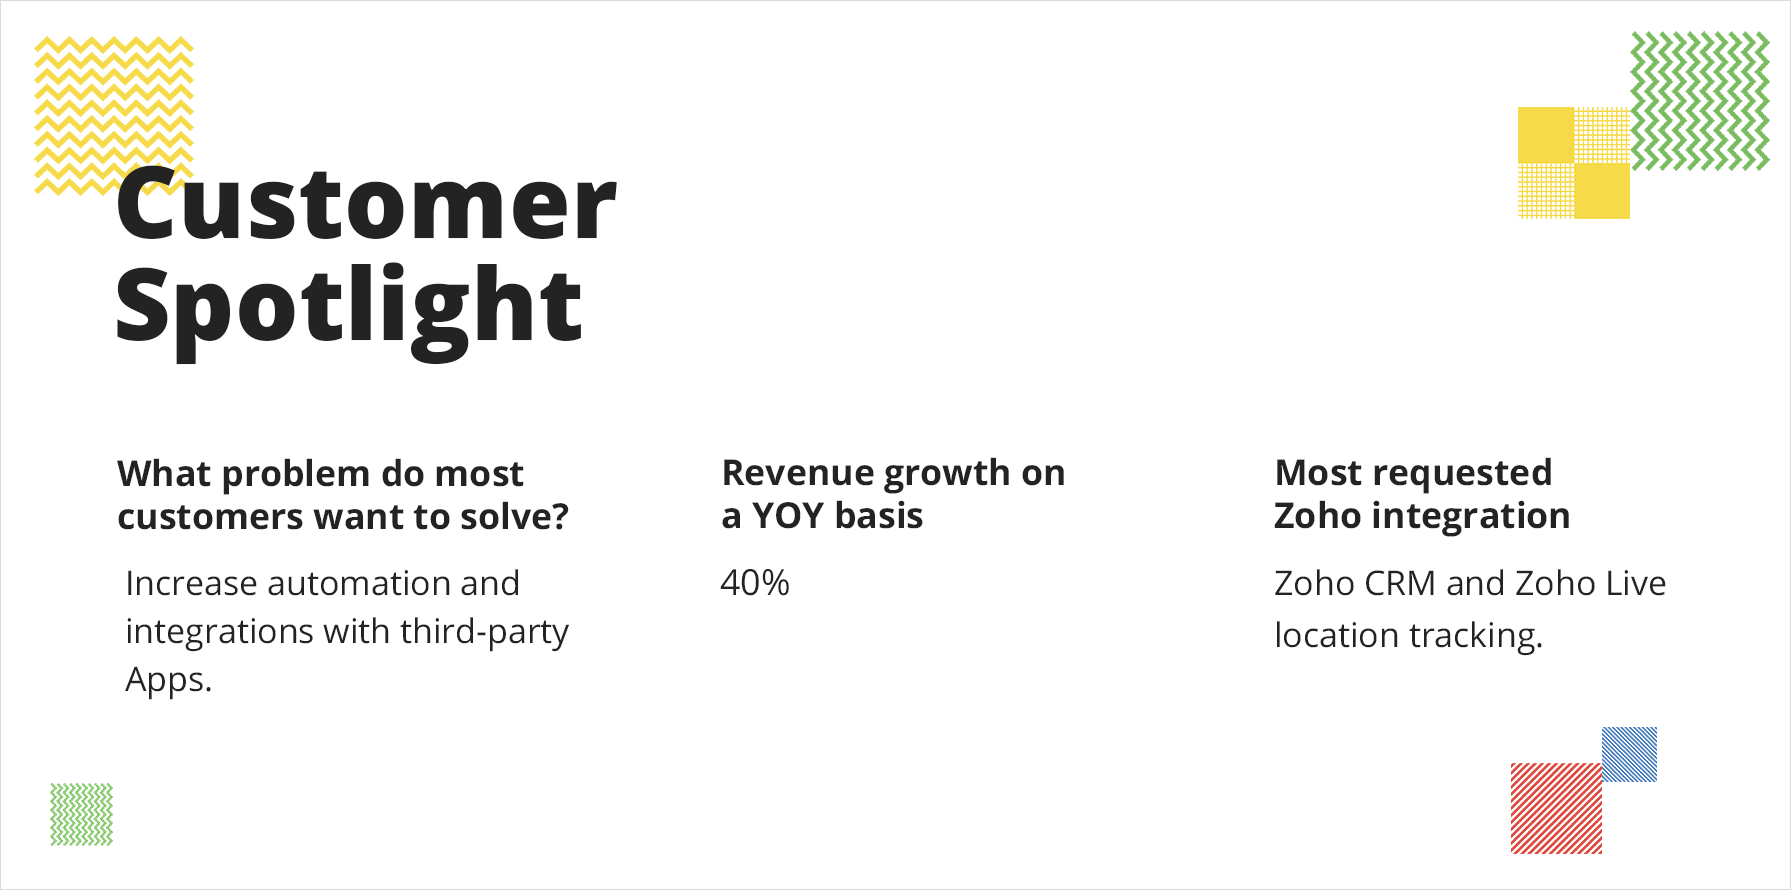 Preferences of the customers using Zoho products.